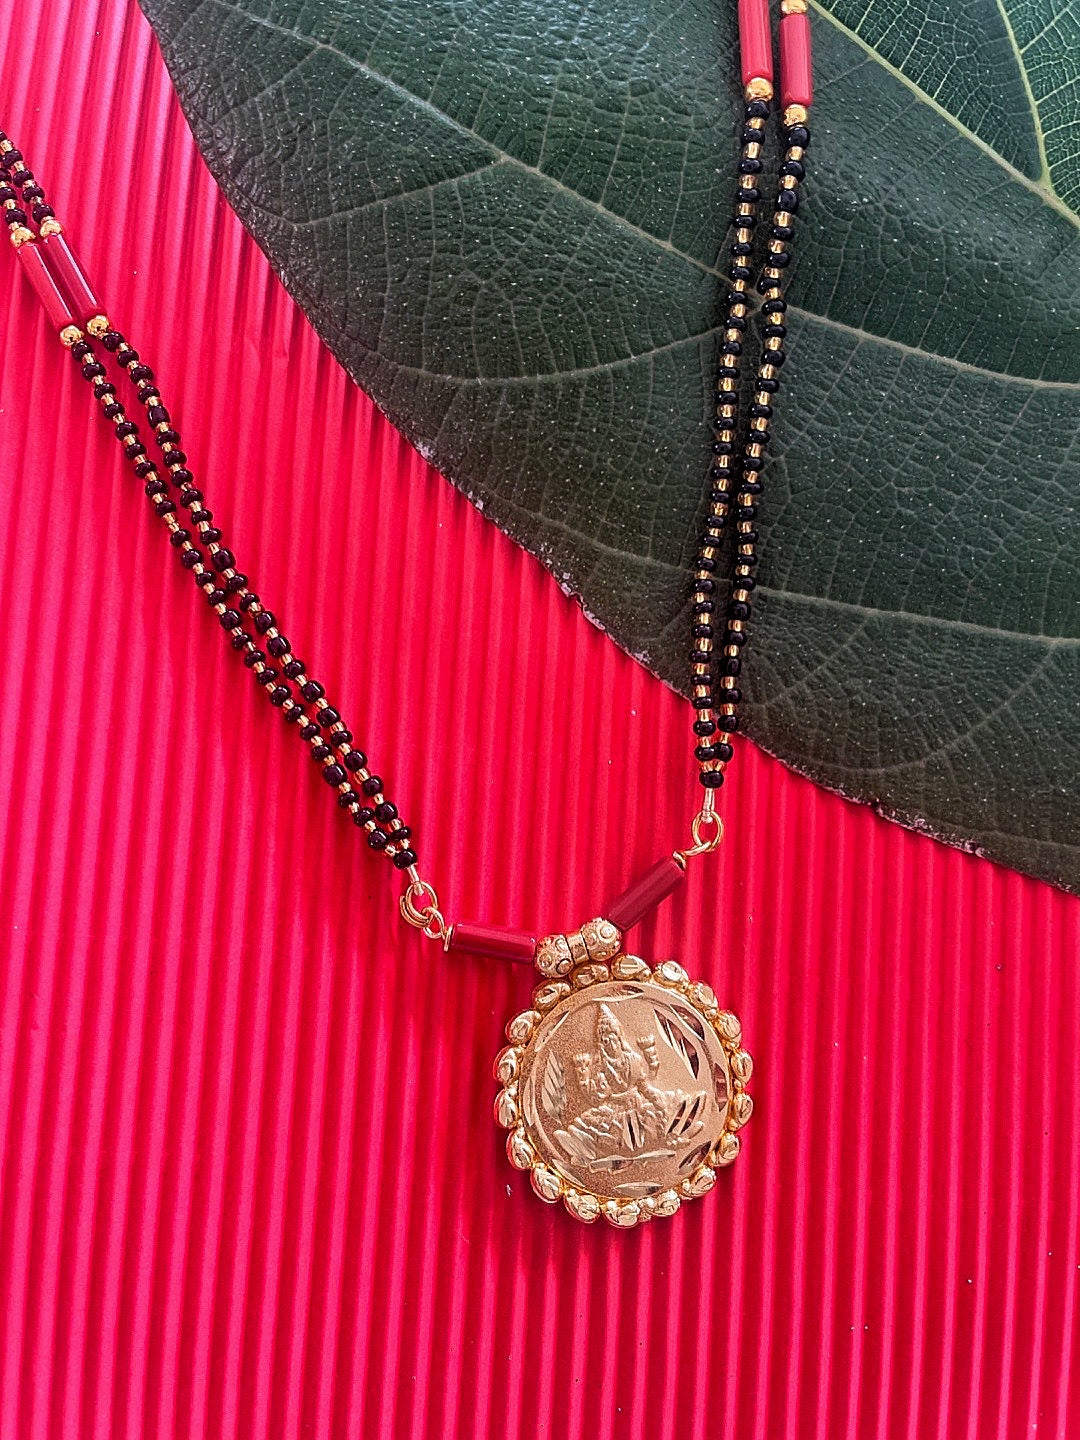 Long Mangalsutra Designs simple gold mangalsutra Laxmi Coin Pendant red black beads chain